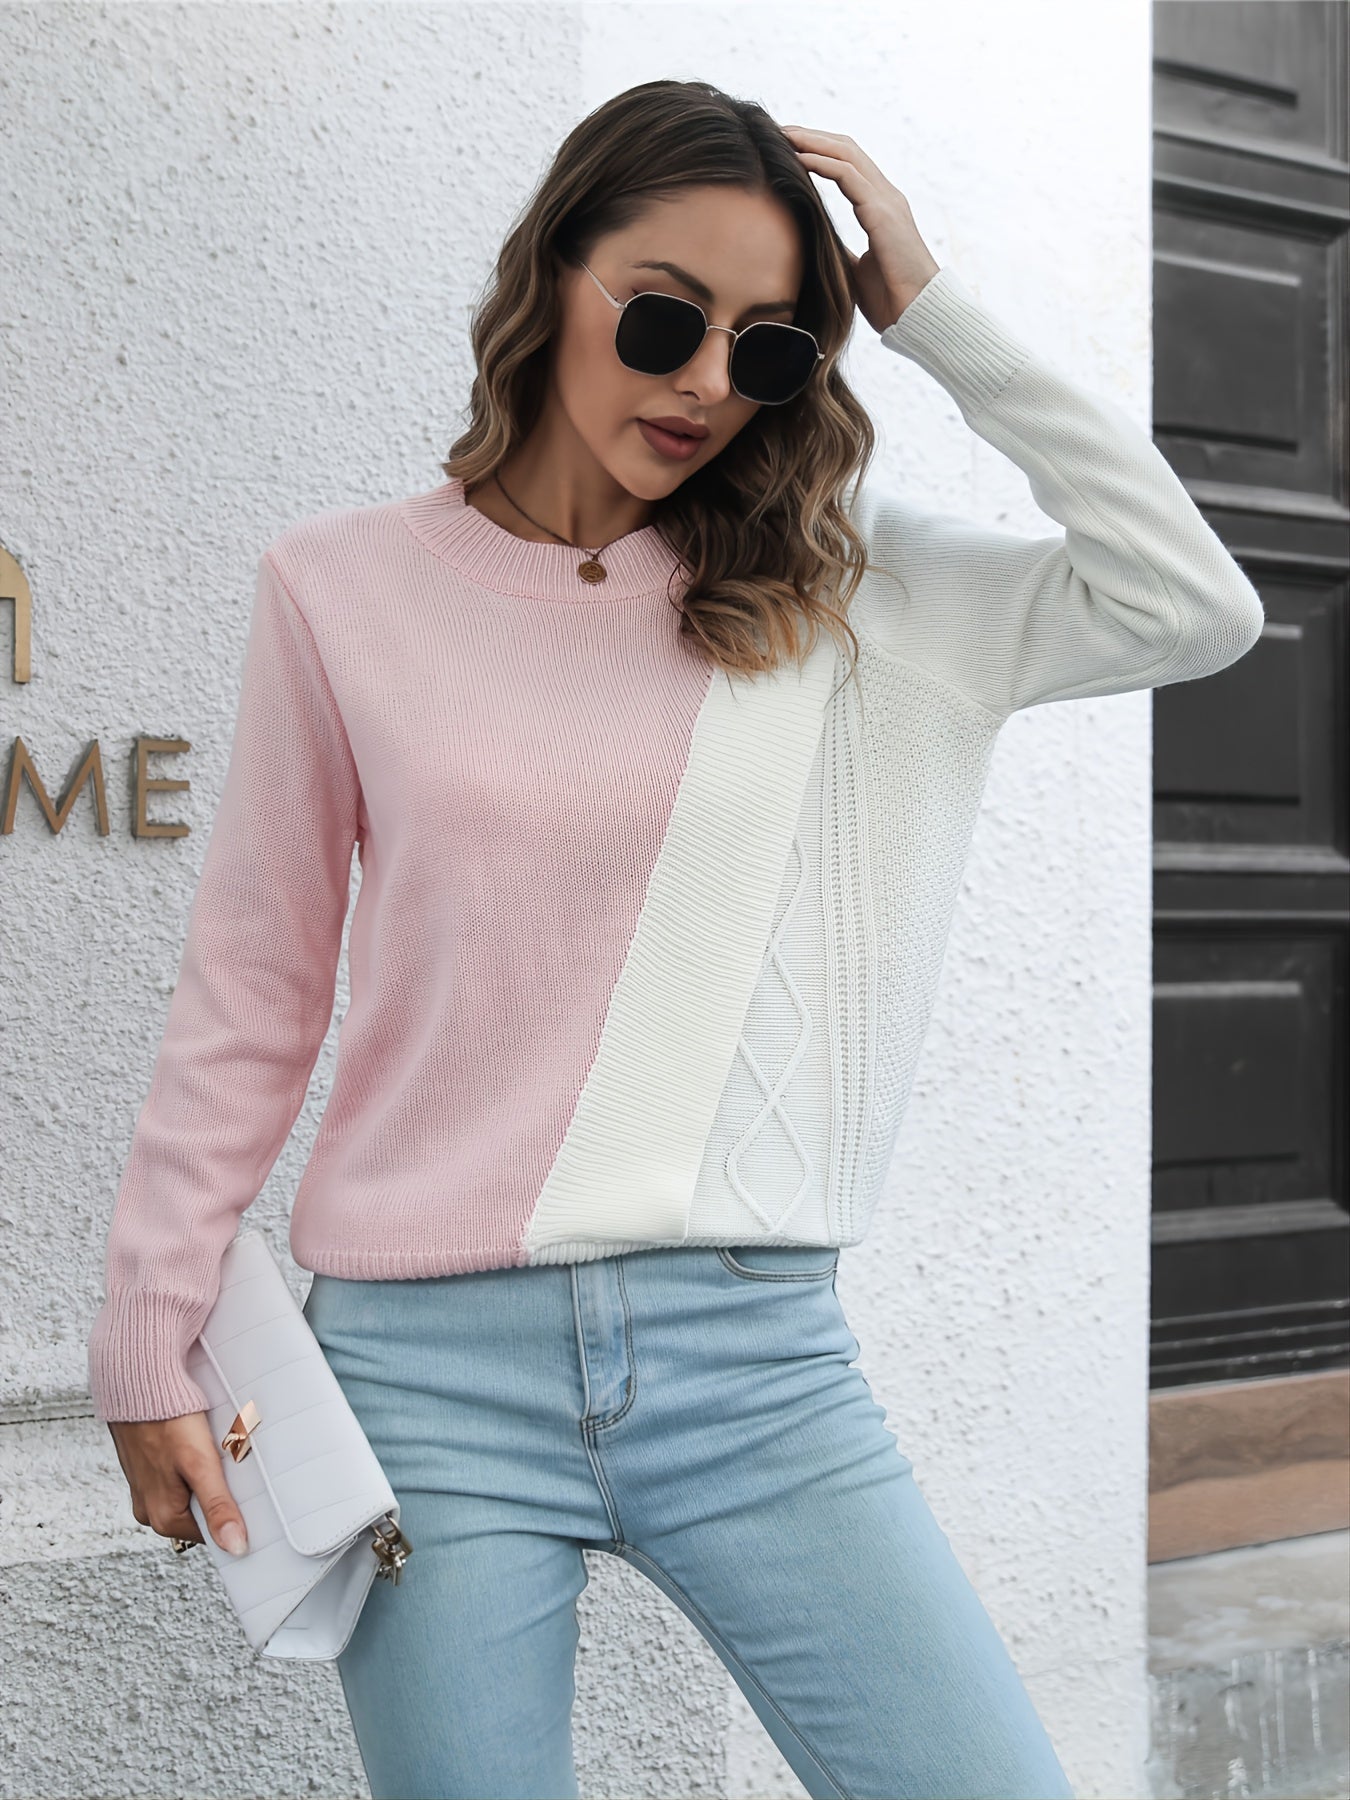 Vzyzv Women's Sweater Casual Crew Neck Colorblock Long Sleeve Loose Fall Winter Knitted Sweater